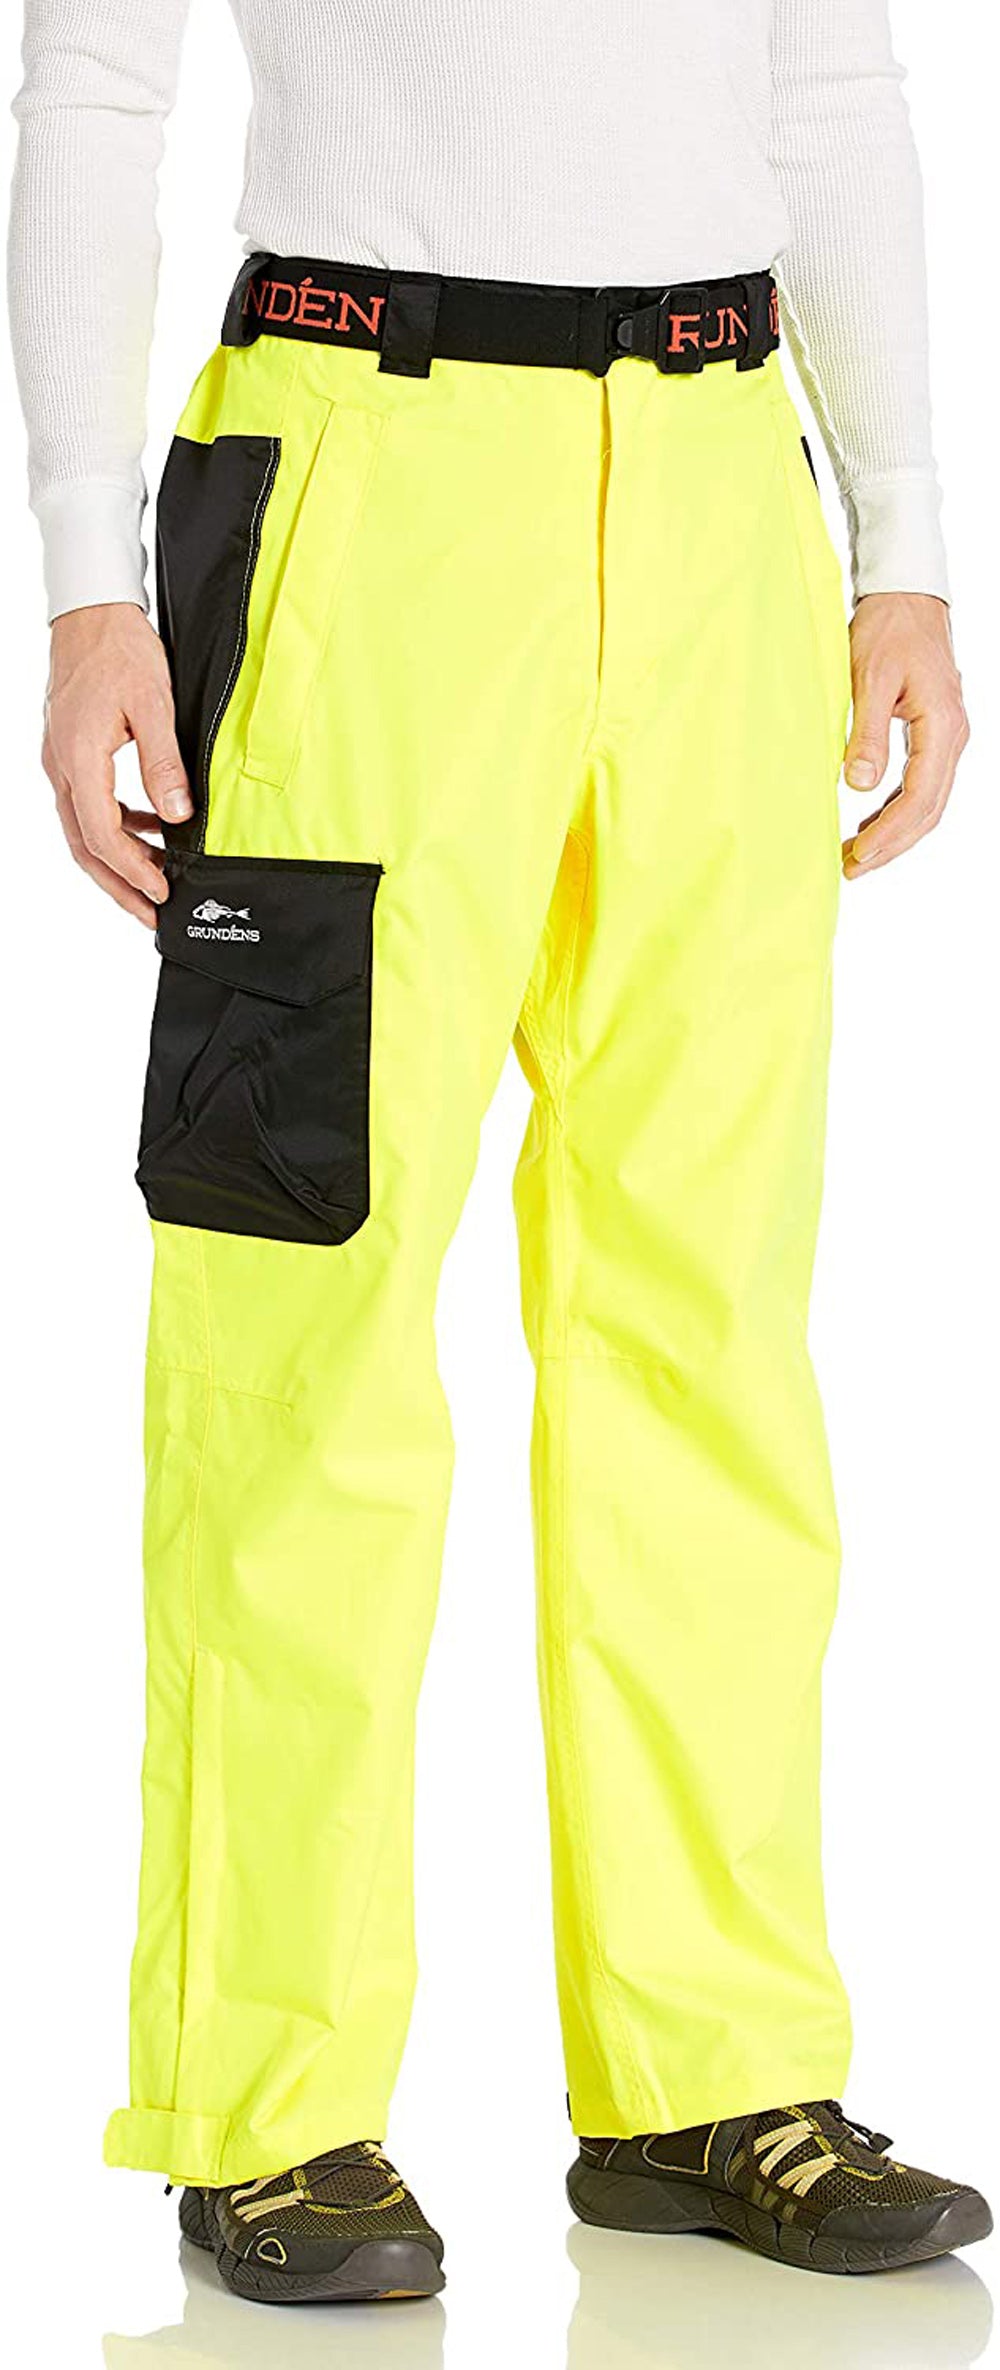 Weather Watch Pant in Hi Vis Yellow color